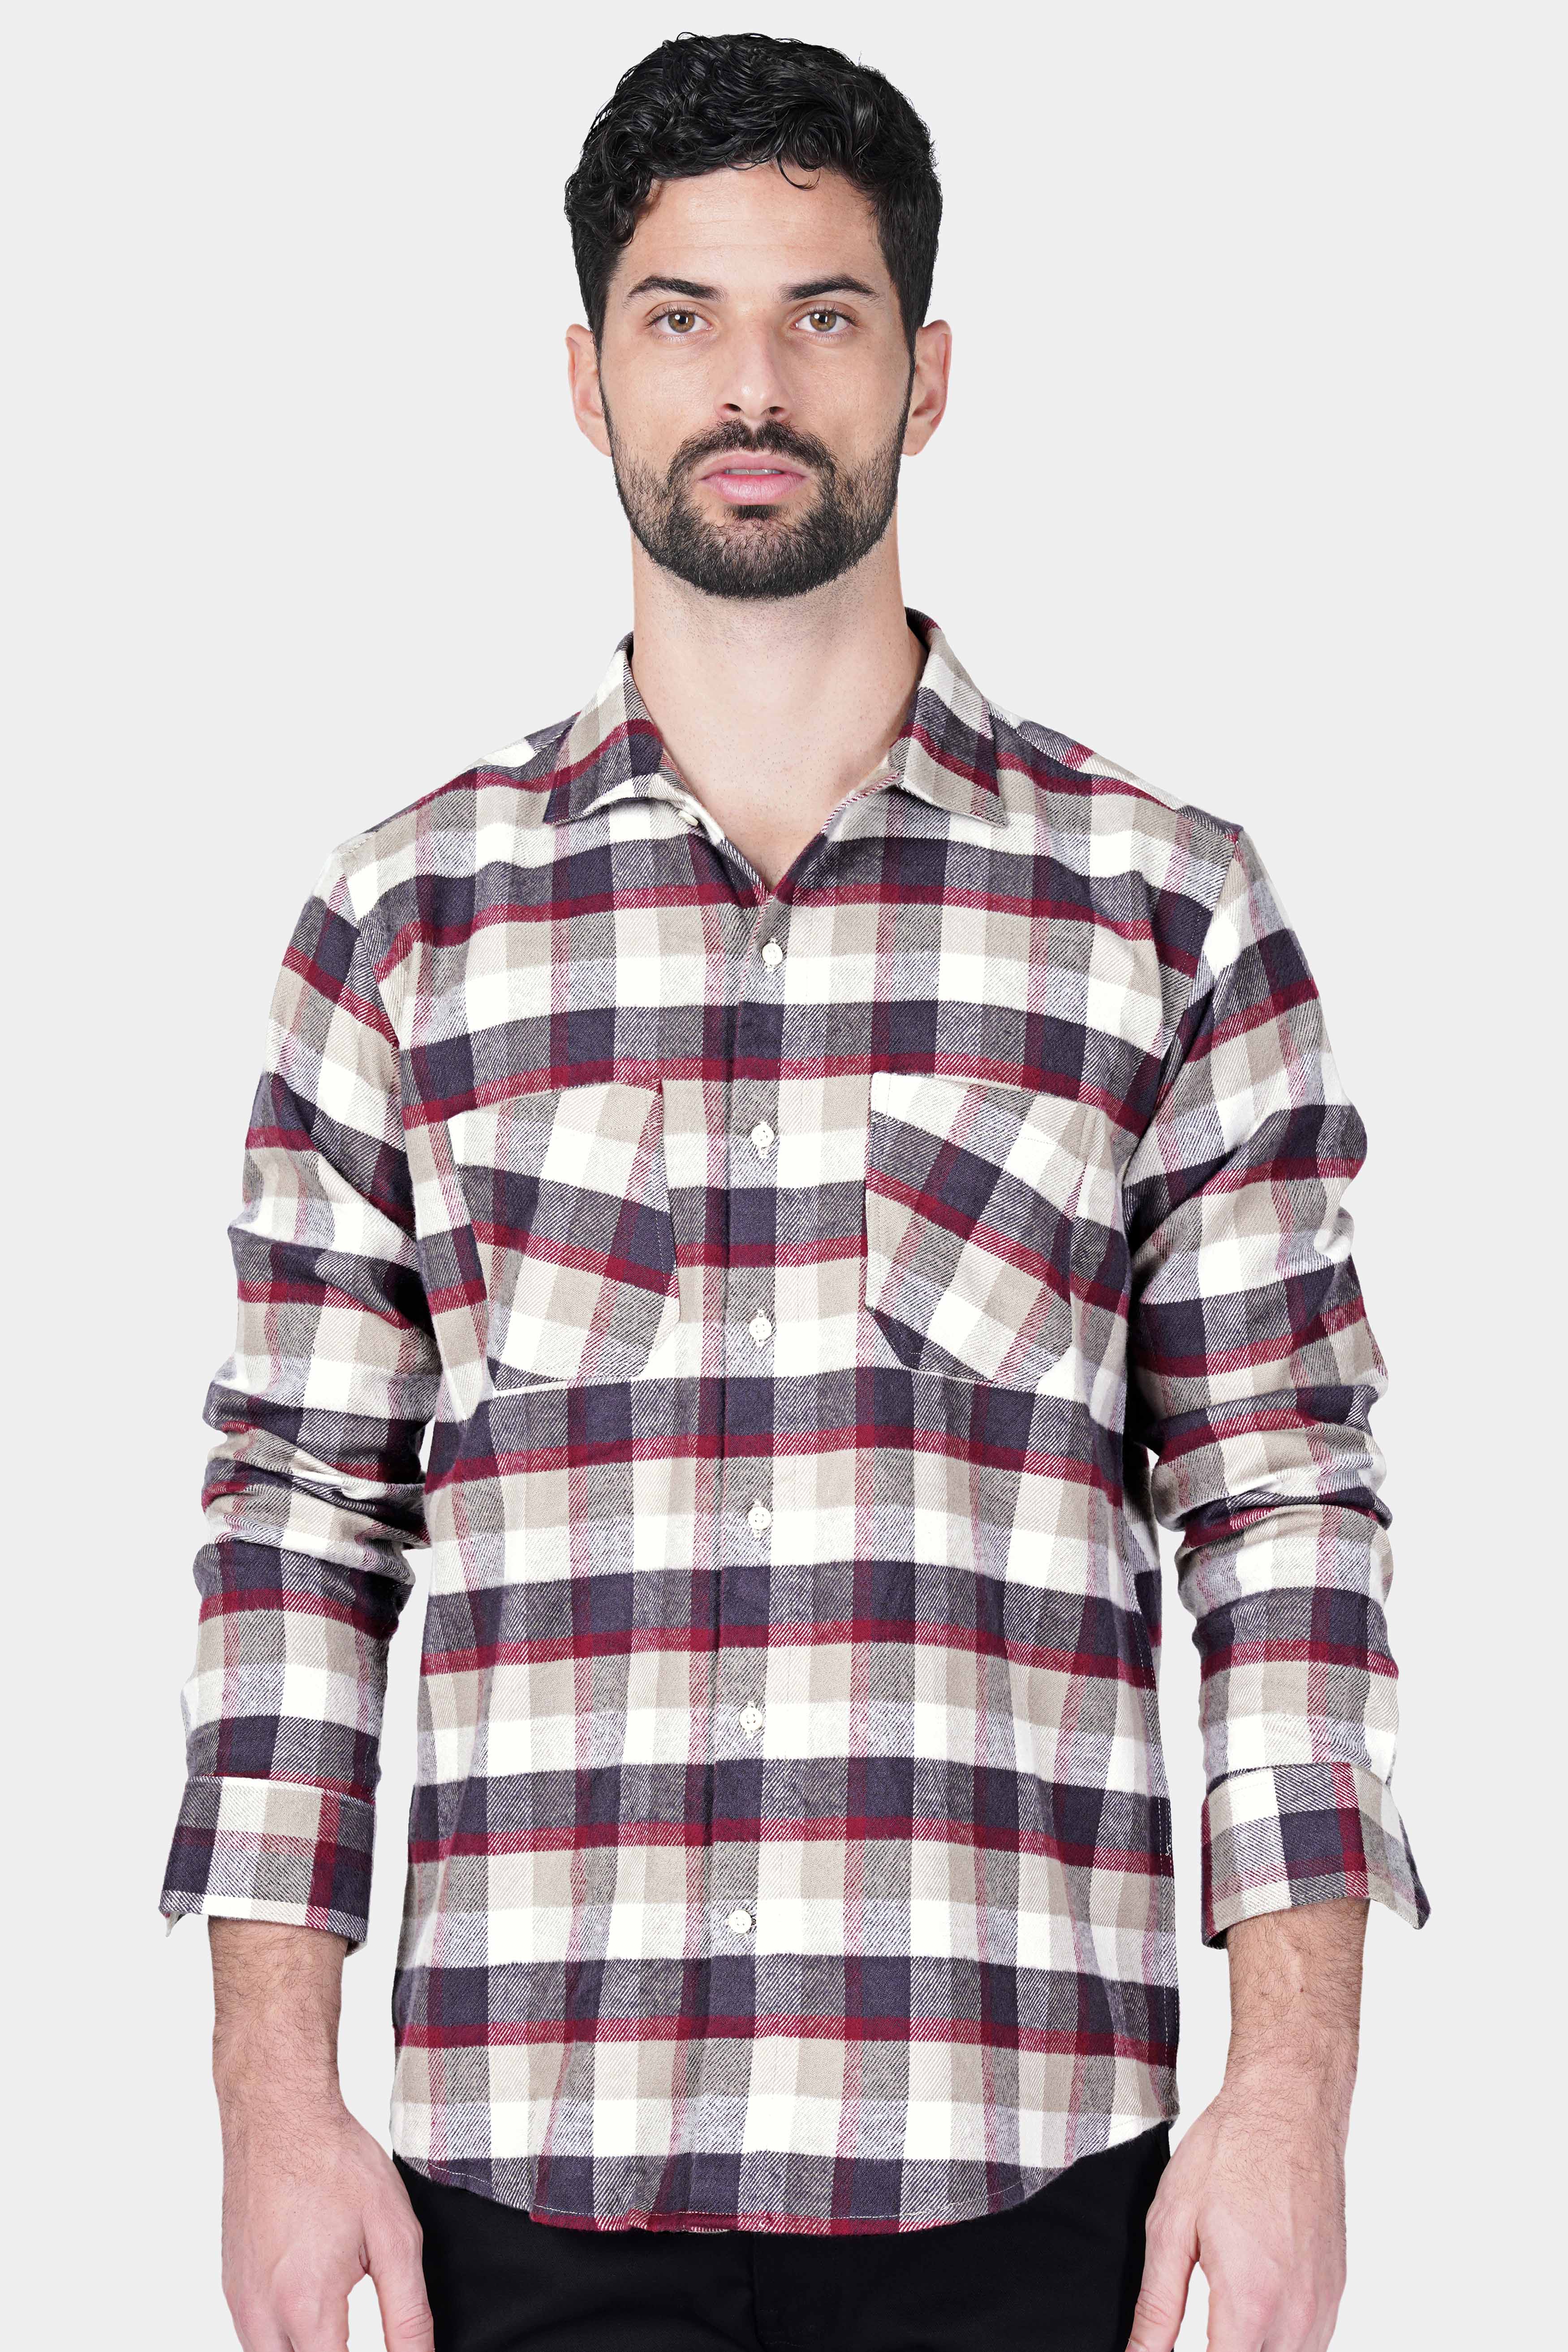 Red And Black Check Shirt - Buy Red And Black Check Shirt online at Best  Prices in India | Flipkart.com